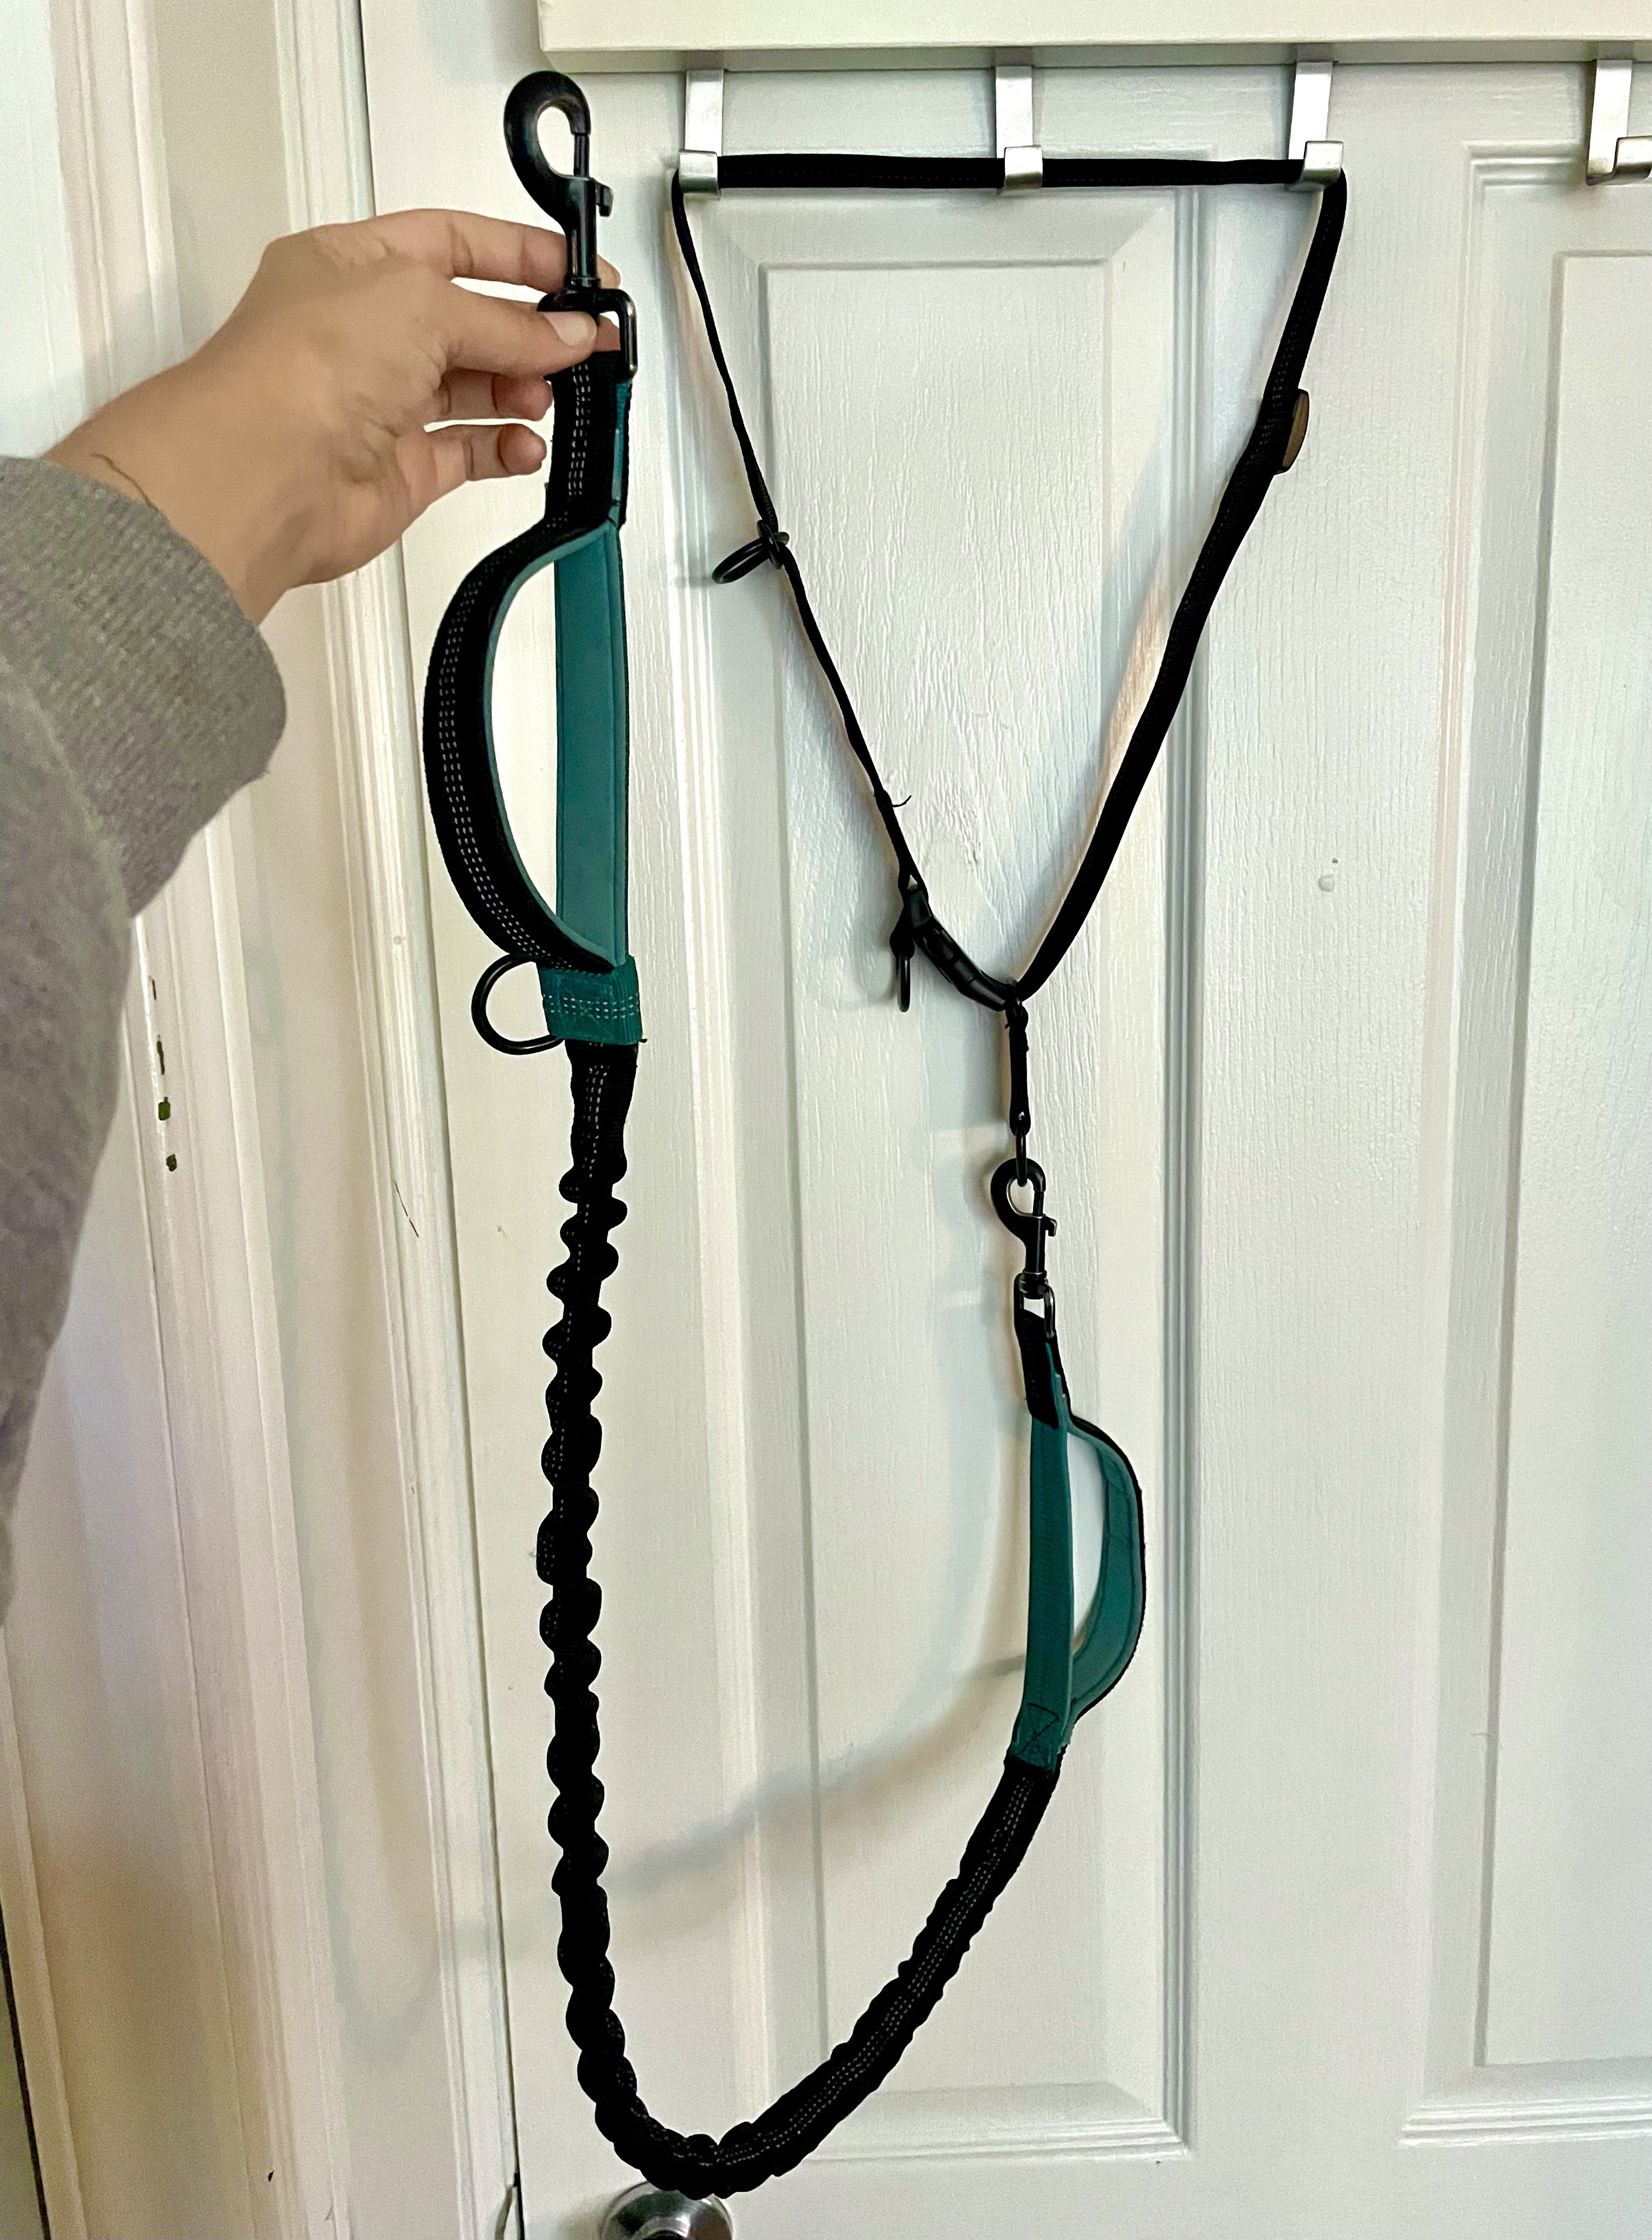 the bungee leash with a waist attachment